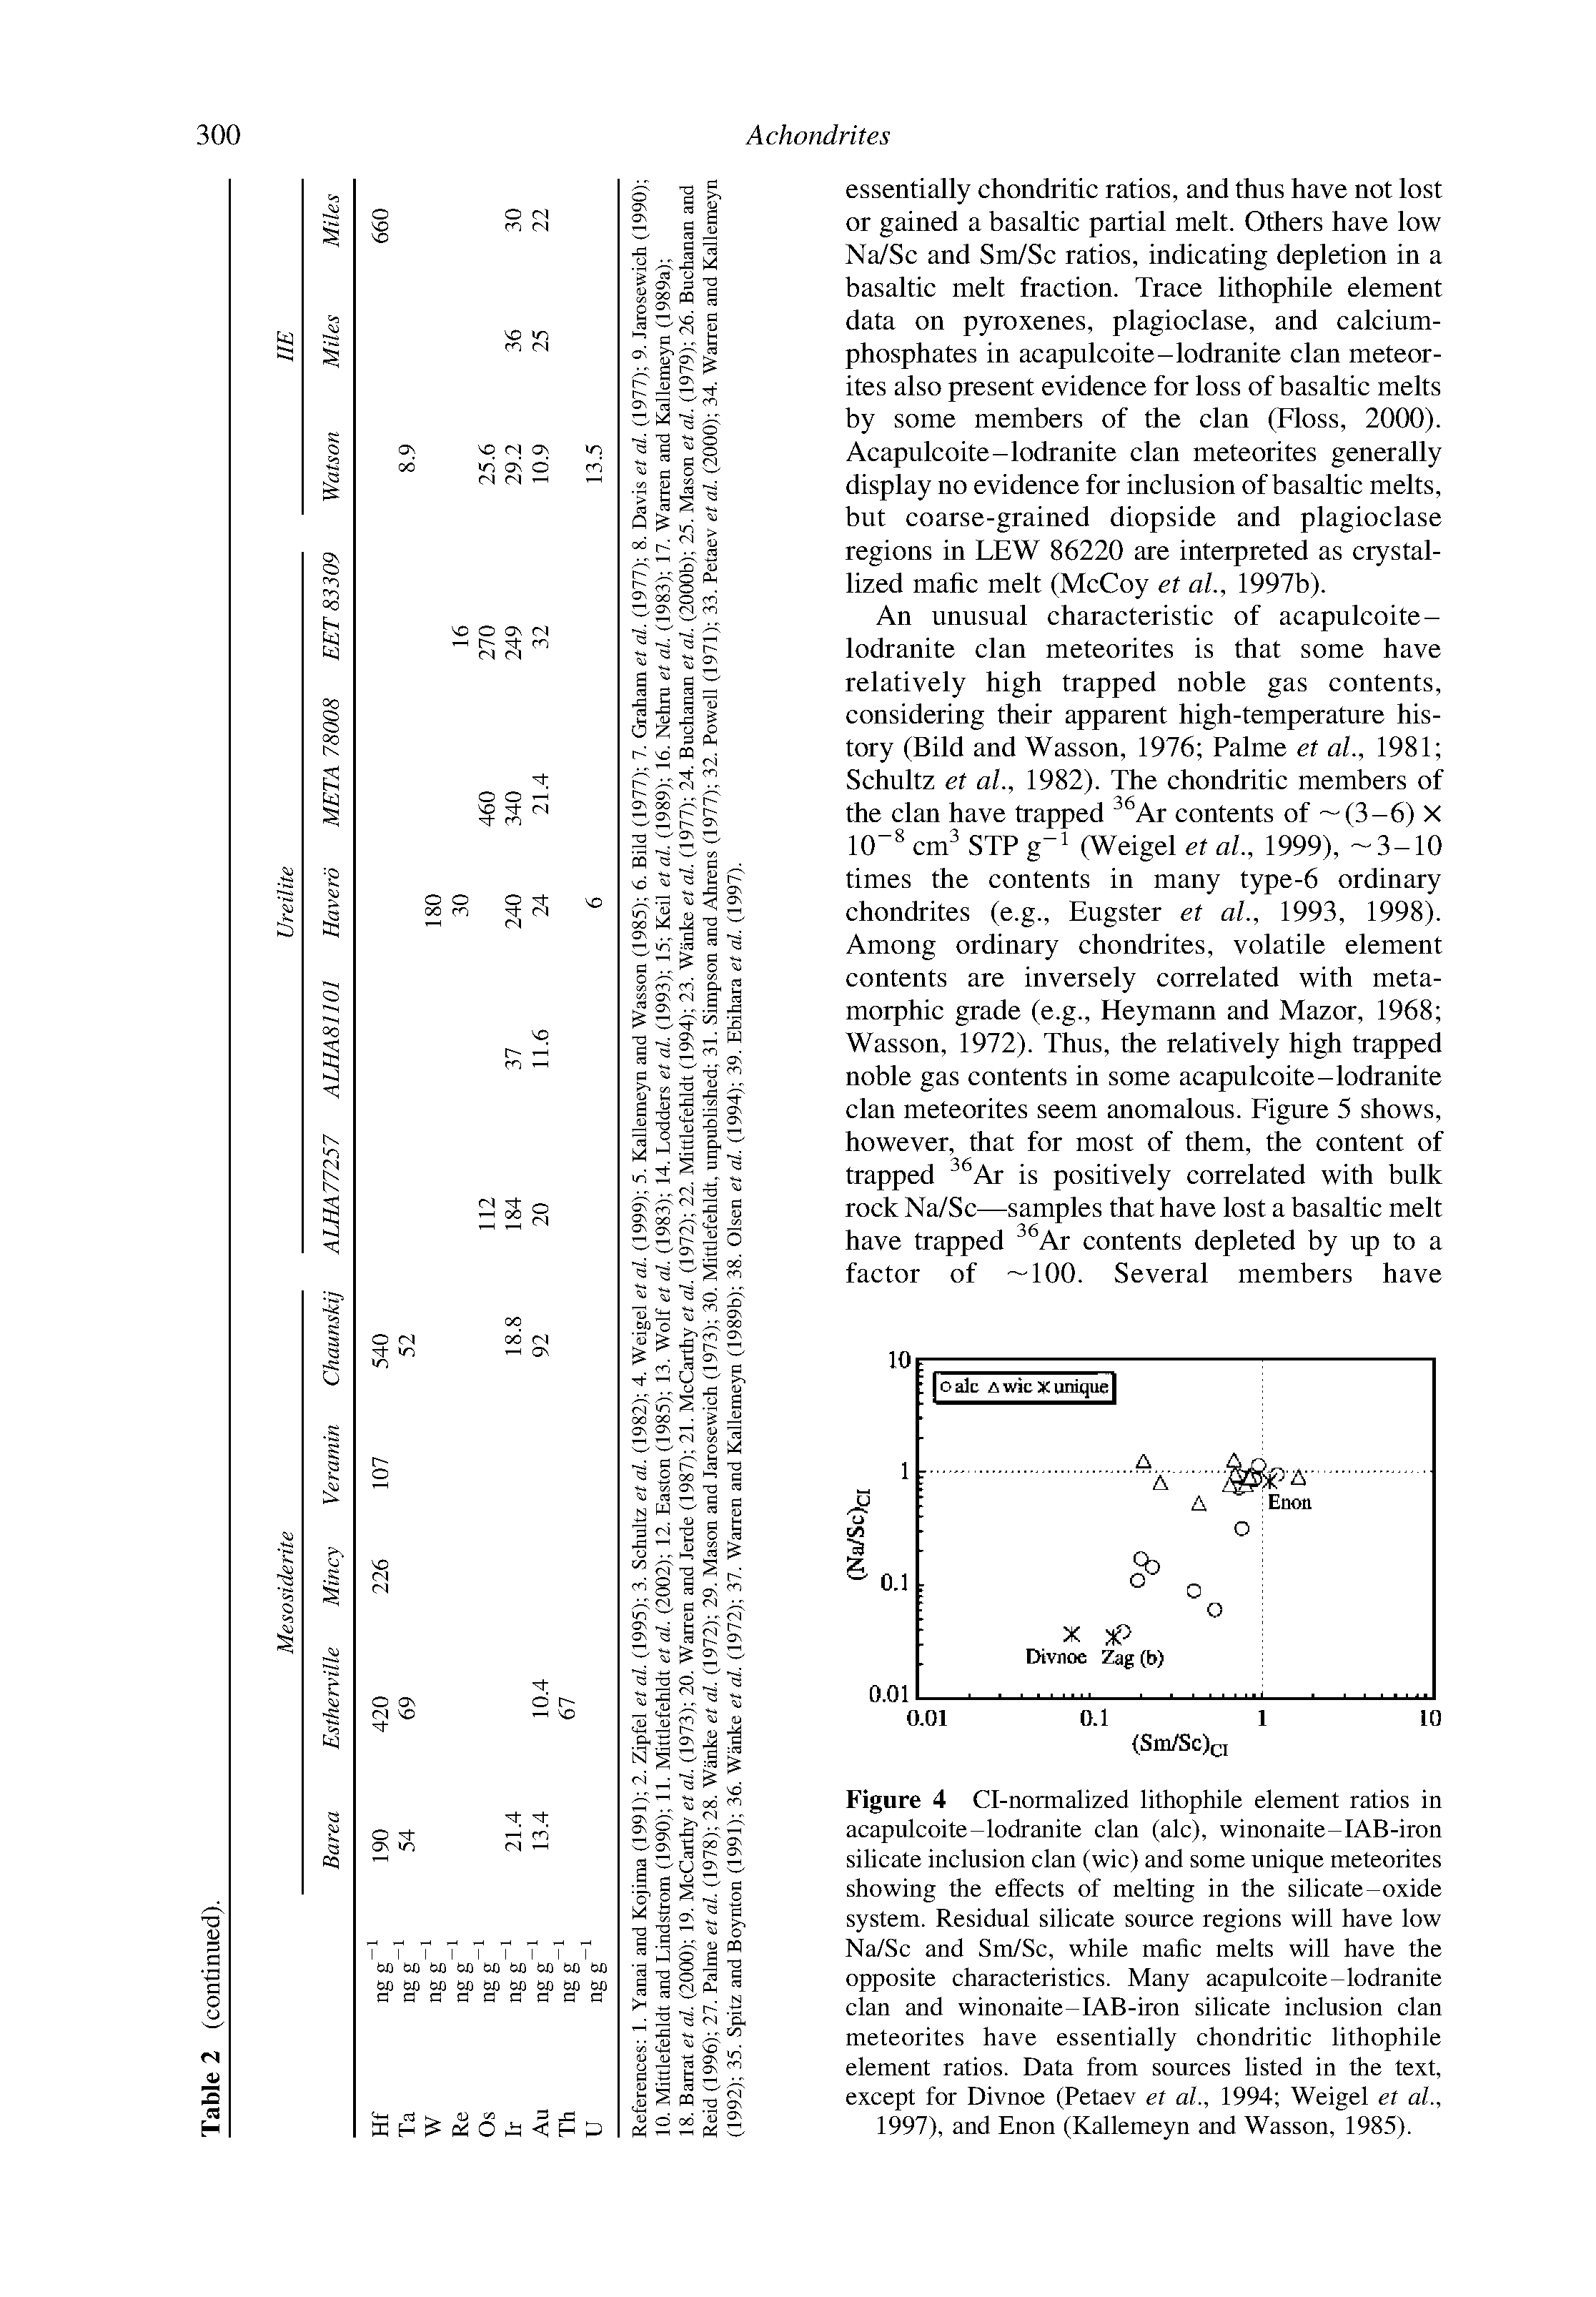 Figure 4 Cl-normalized lithophile element ratios in acapulcoite-lodranite clan (ale), winonaite-IAB-iron silicate inclusion clan (wic) and some unique meteorites showing the effects of melting in the silicate-oxide system. Residual silicate source regions will have low Na/Sc and Sm/Sc, while mafic melts will have the opposite characteristics. Many acapulcoite-lodranite clan and winonaite-IAB-iron silicate inclusion clan meteorites have essentially chondritic lithophile element ratios. Data from sources listed in the text, except for Divnoe (Petaev et al., 1994 Weigel et al., 1997), and Enon (Kallemeyn and Wasson, 1985).